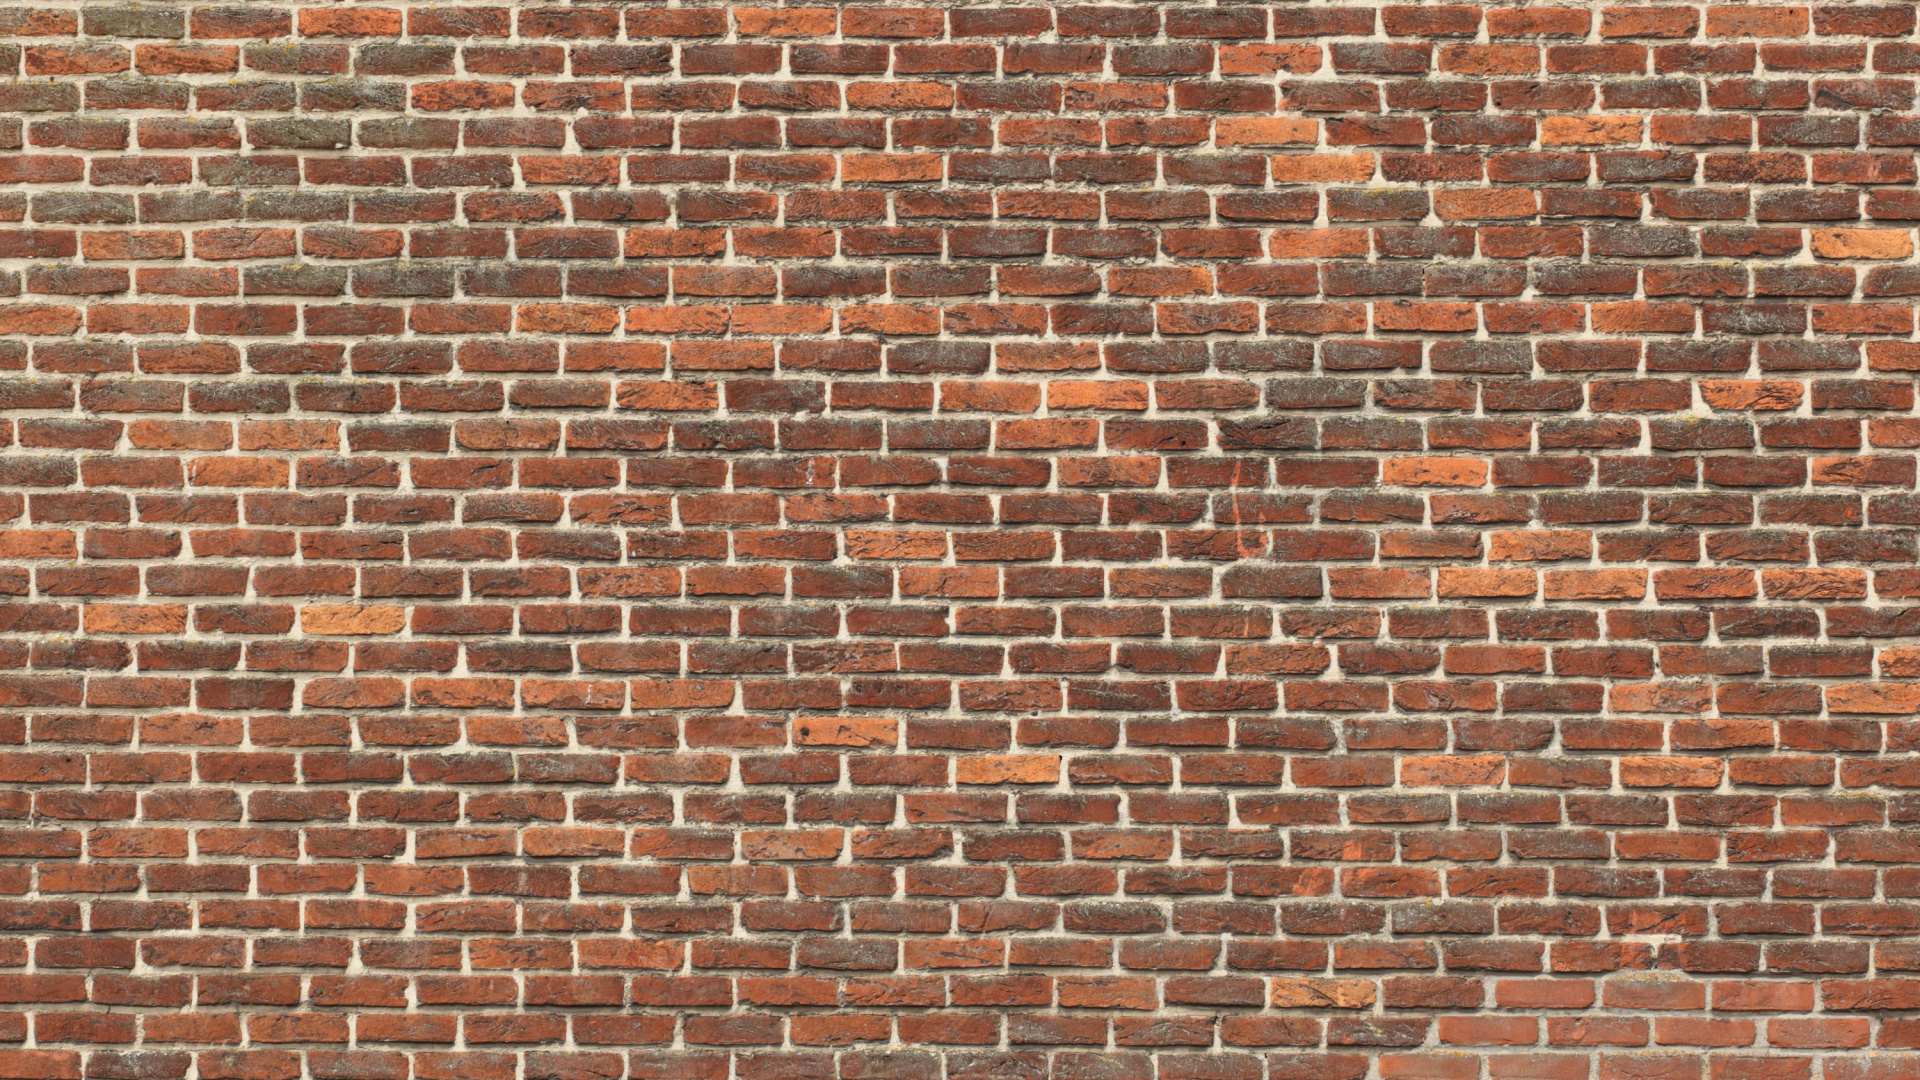 Brown and Black Brick Wall. Wallpaper in 1920x1080 Resolution